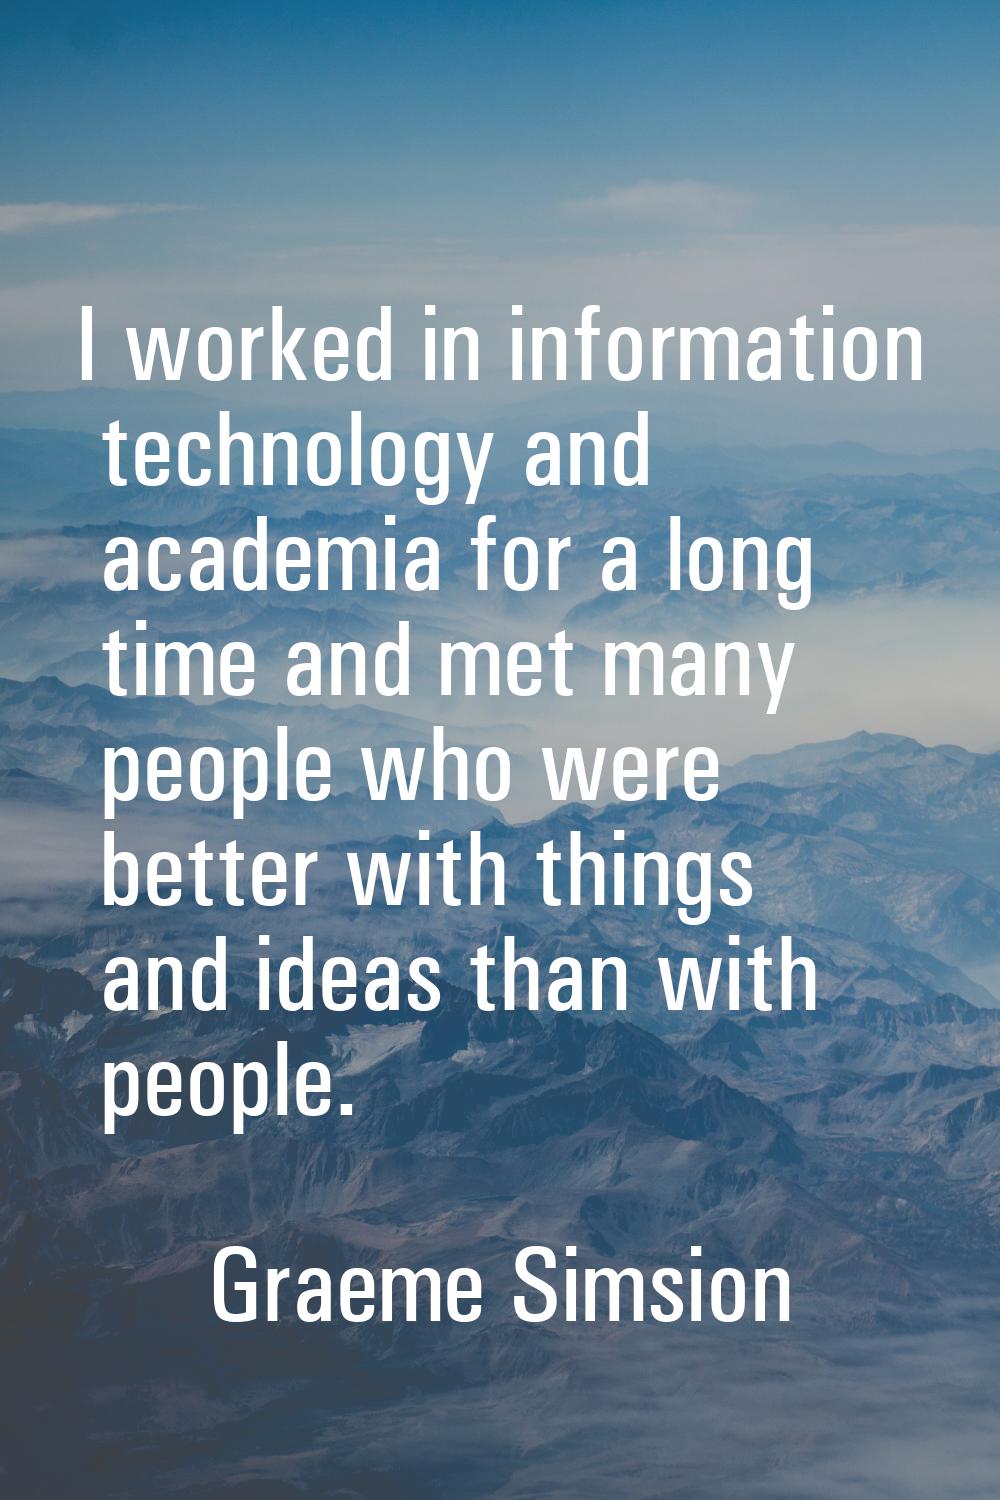 I worked in information technology and academia for a long time and met many people who were better